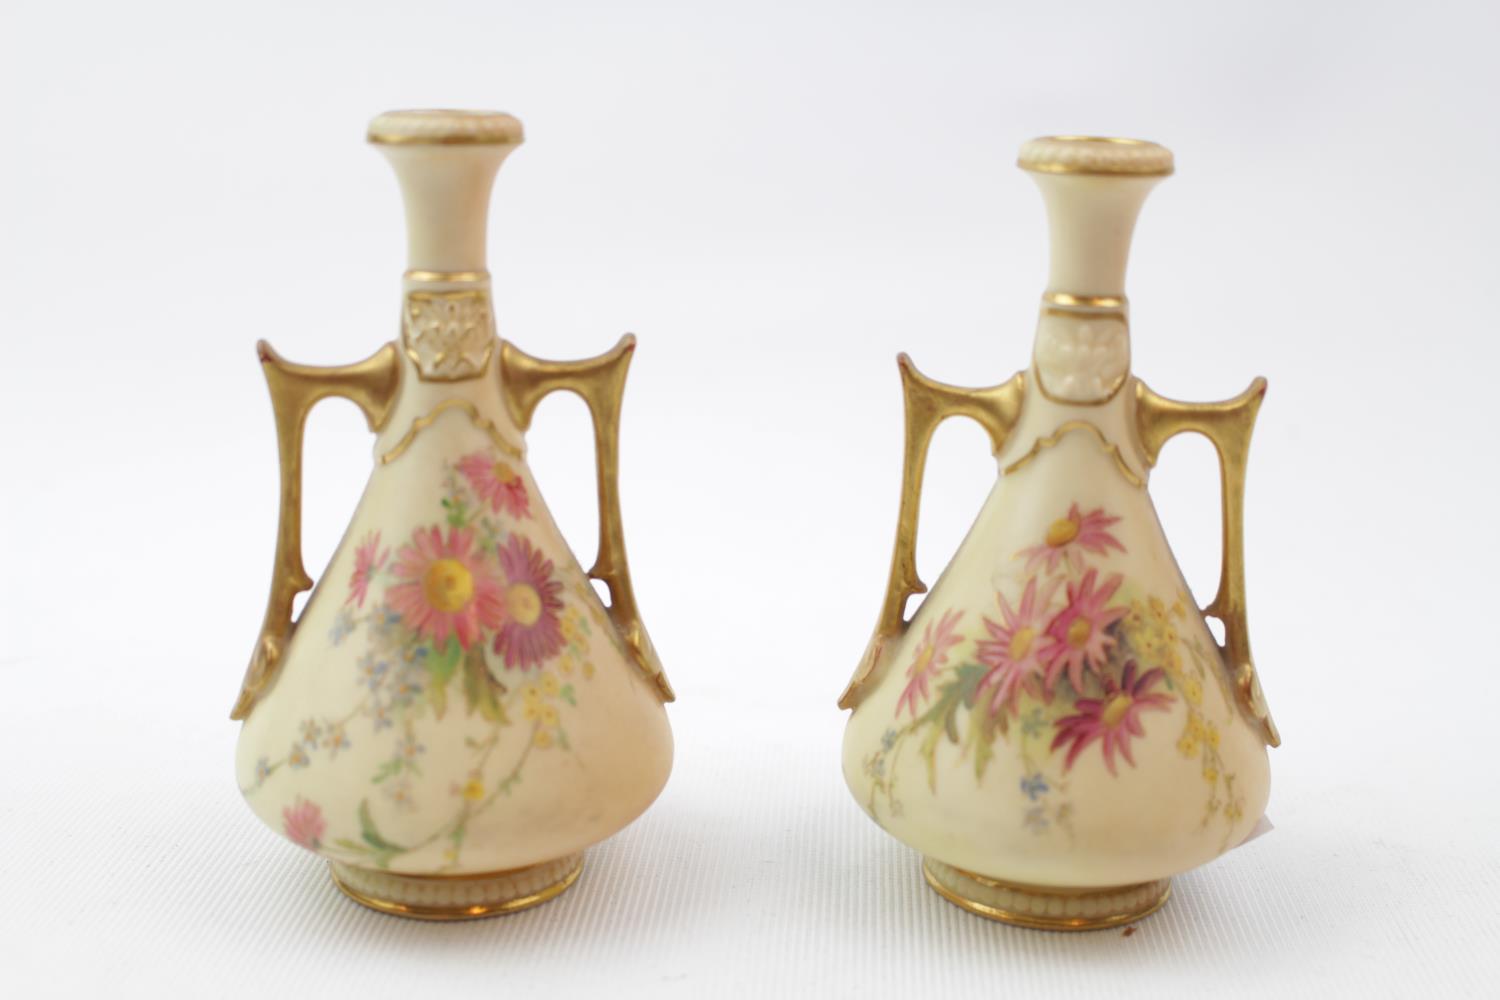 Pair of Royal Worcester Blush Ivory two handled vases with floral sprig decoration pattern 1021 10cm